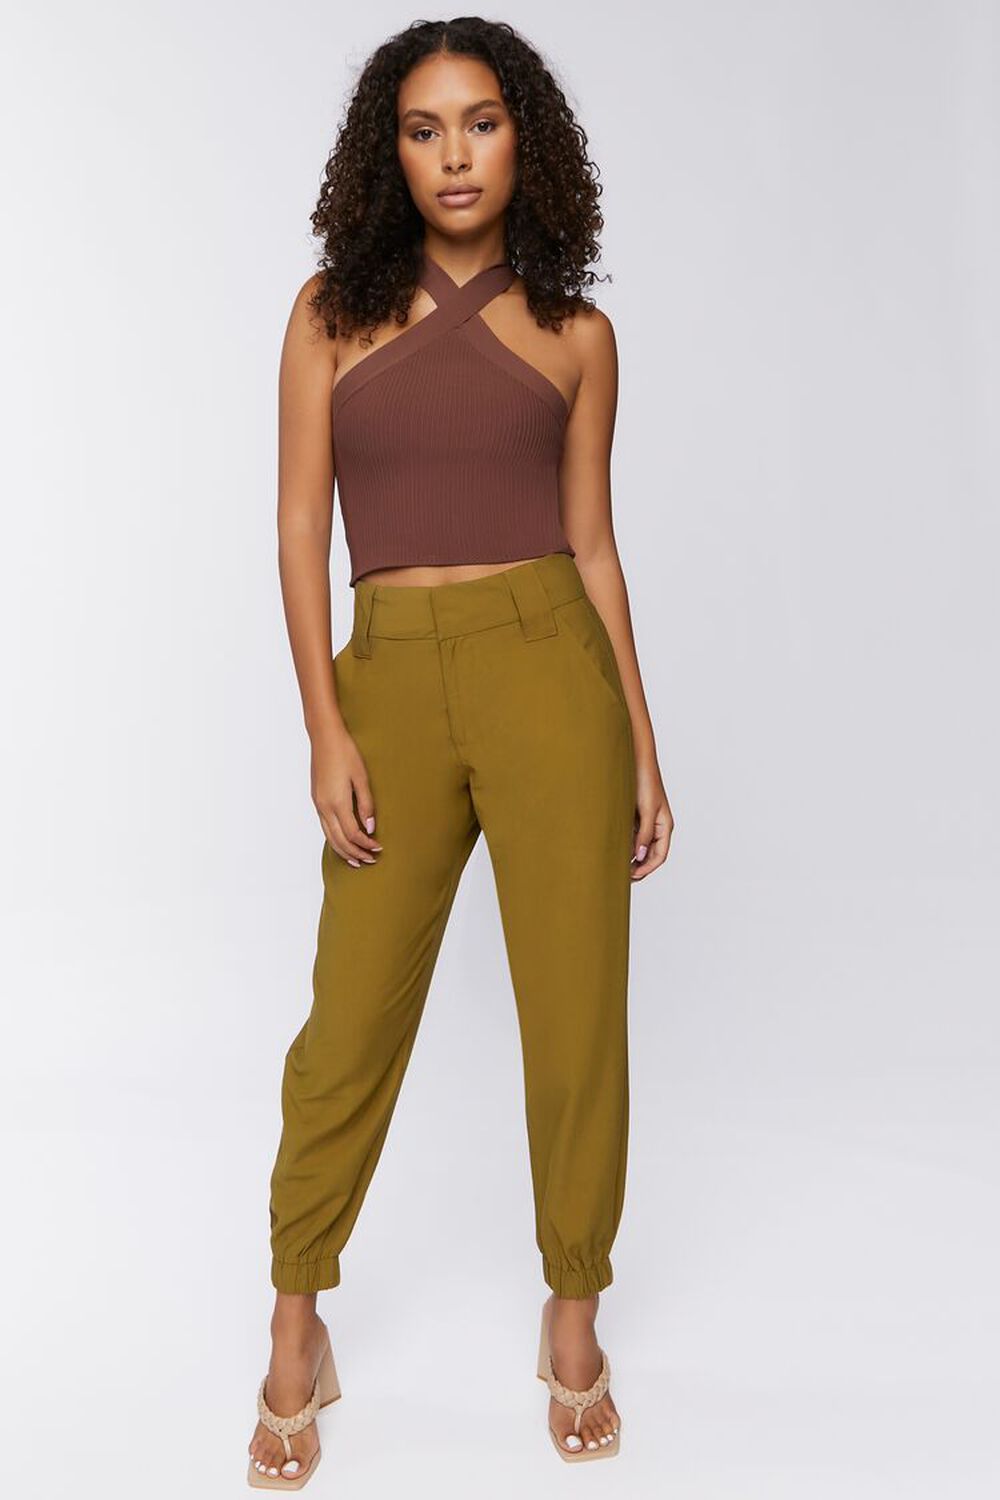 BEECH Mid-Rise Ankle Pants, image 1